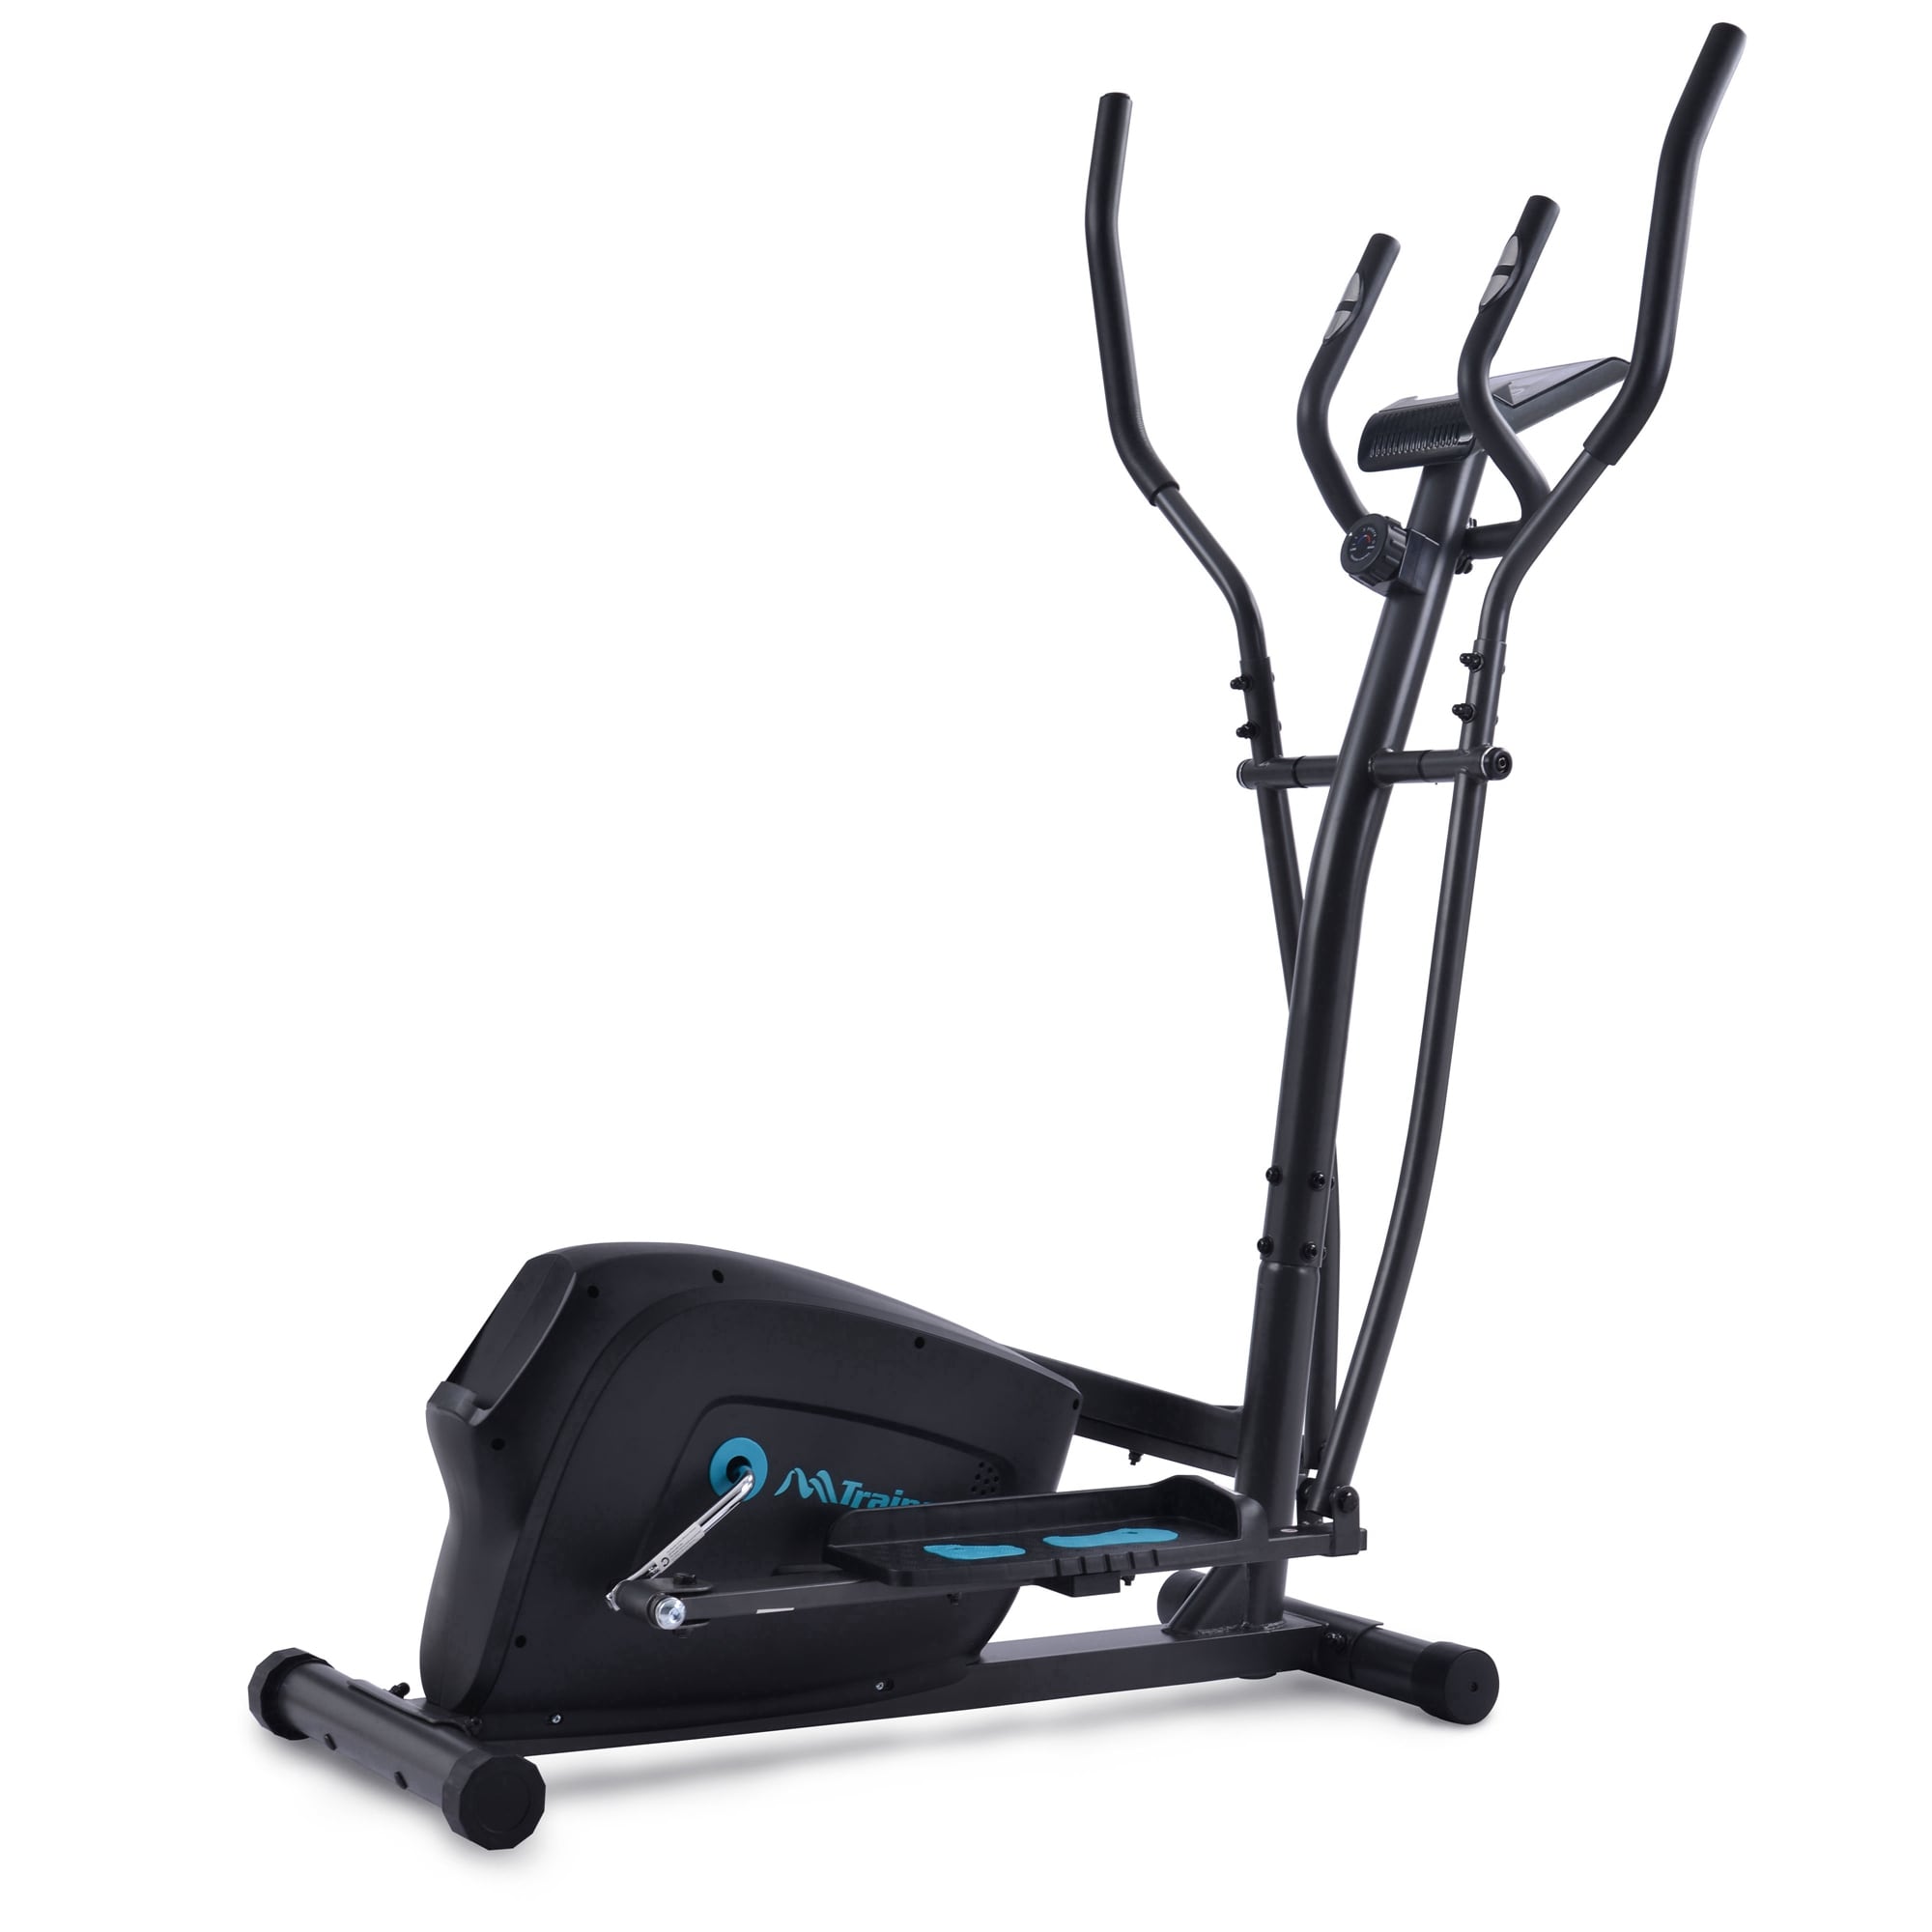 Details about   Fitness Double Pedal Exercise Bike 8 Levels Magnetic Gym Resistance Trainer USA 